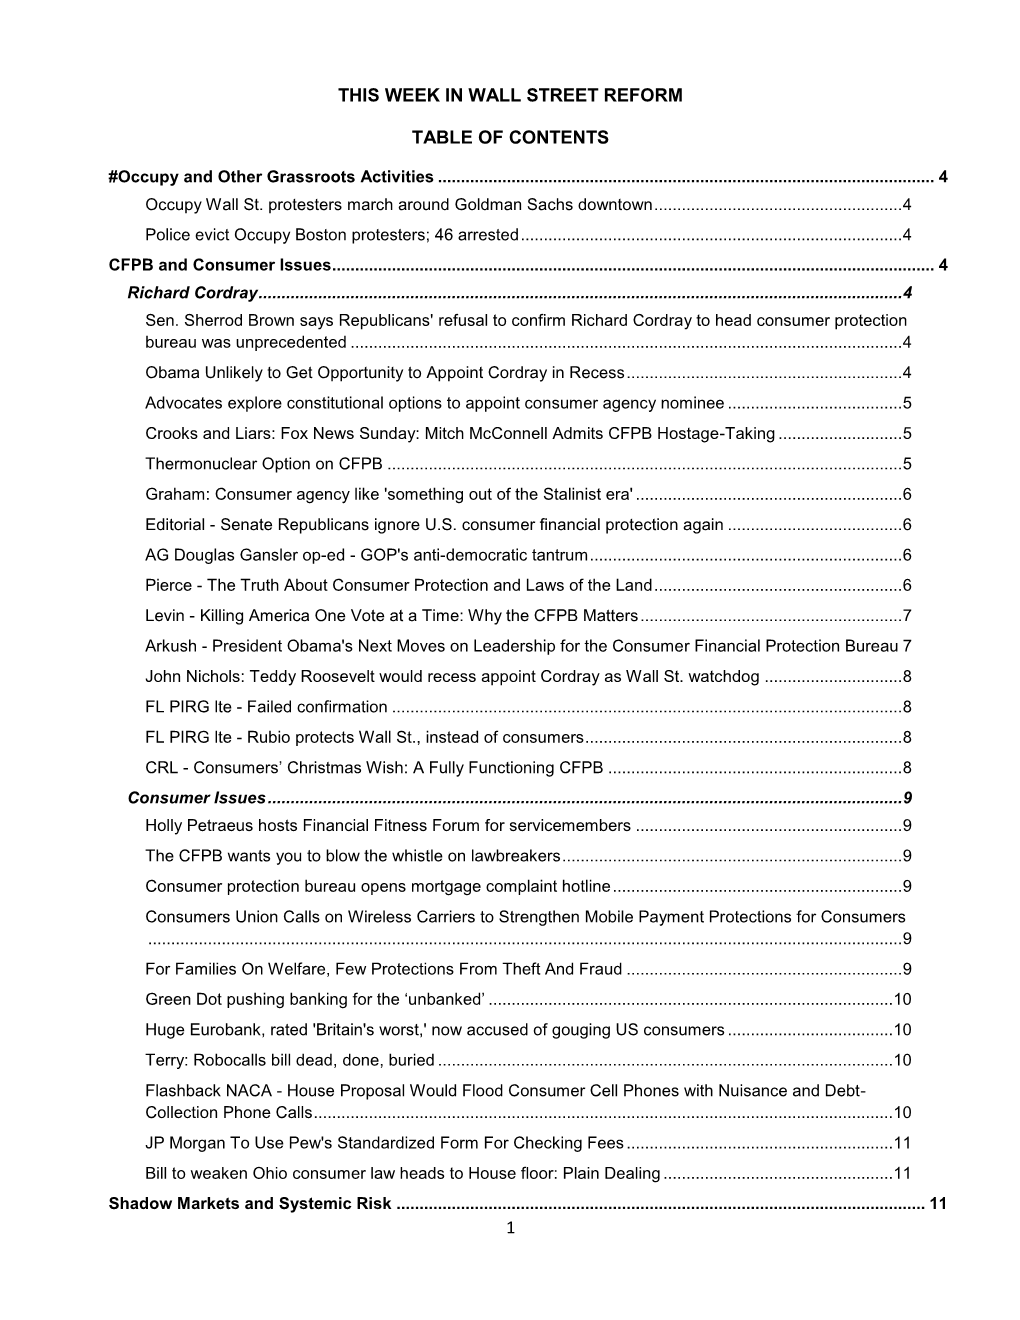 1 This Week in Wall Street Reform Table of Contents